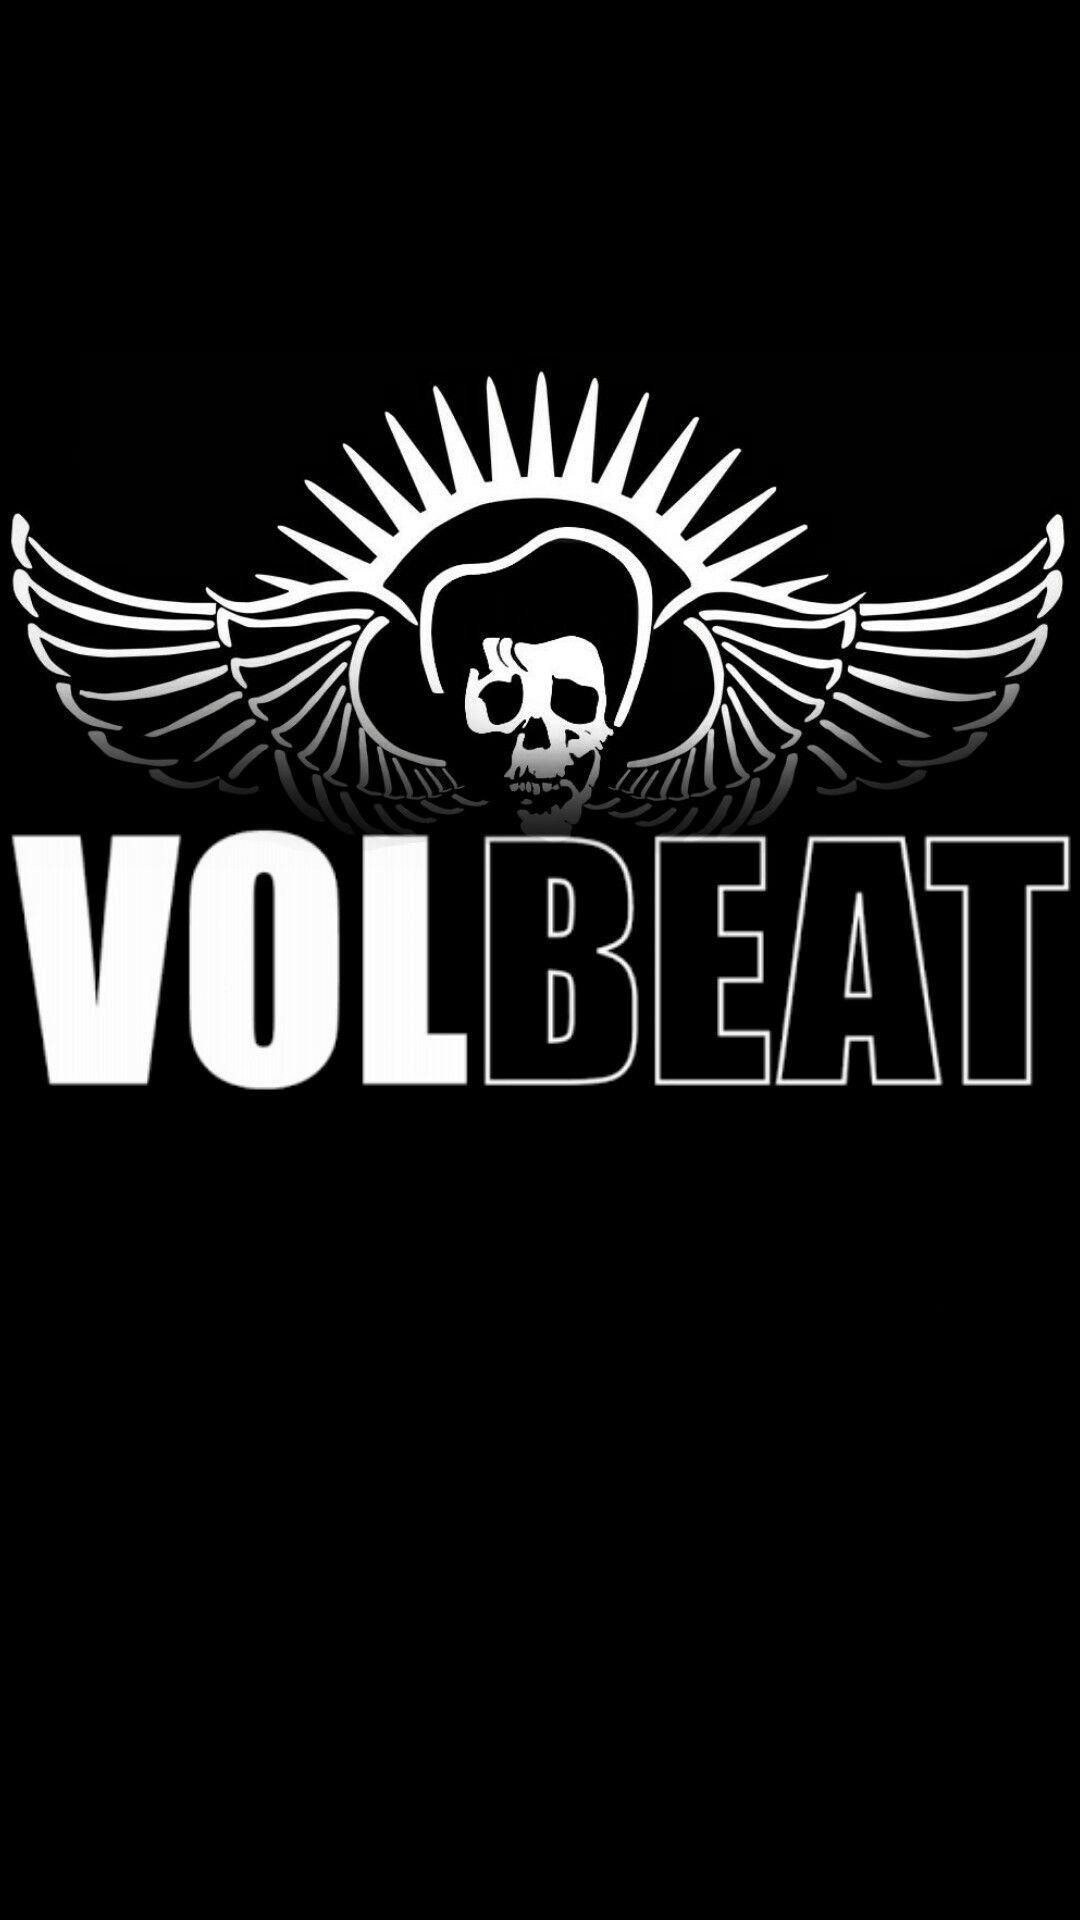 when is the new volbeat album coming out